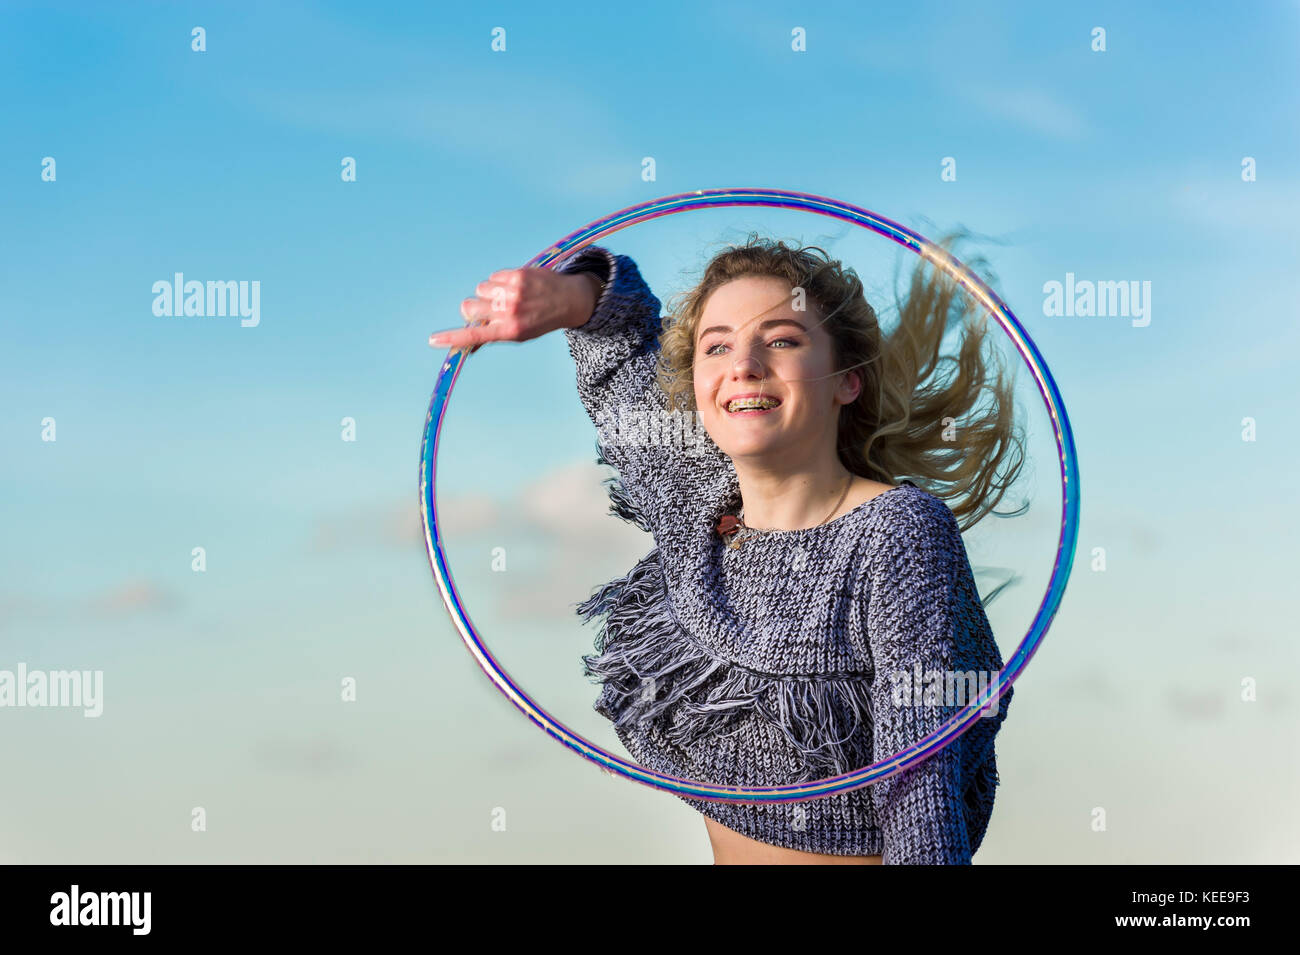 Girl smiles as she performs hooping, captured in mid air, looking through hoop against a blue sky with some small clouds. Stock Photo